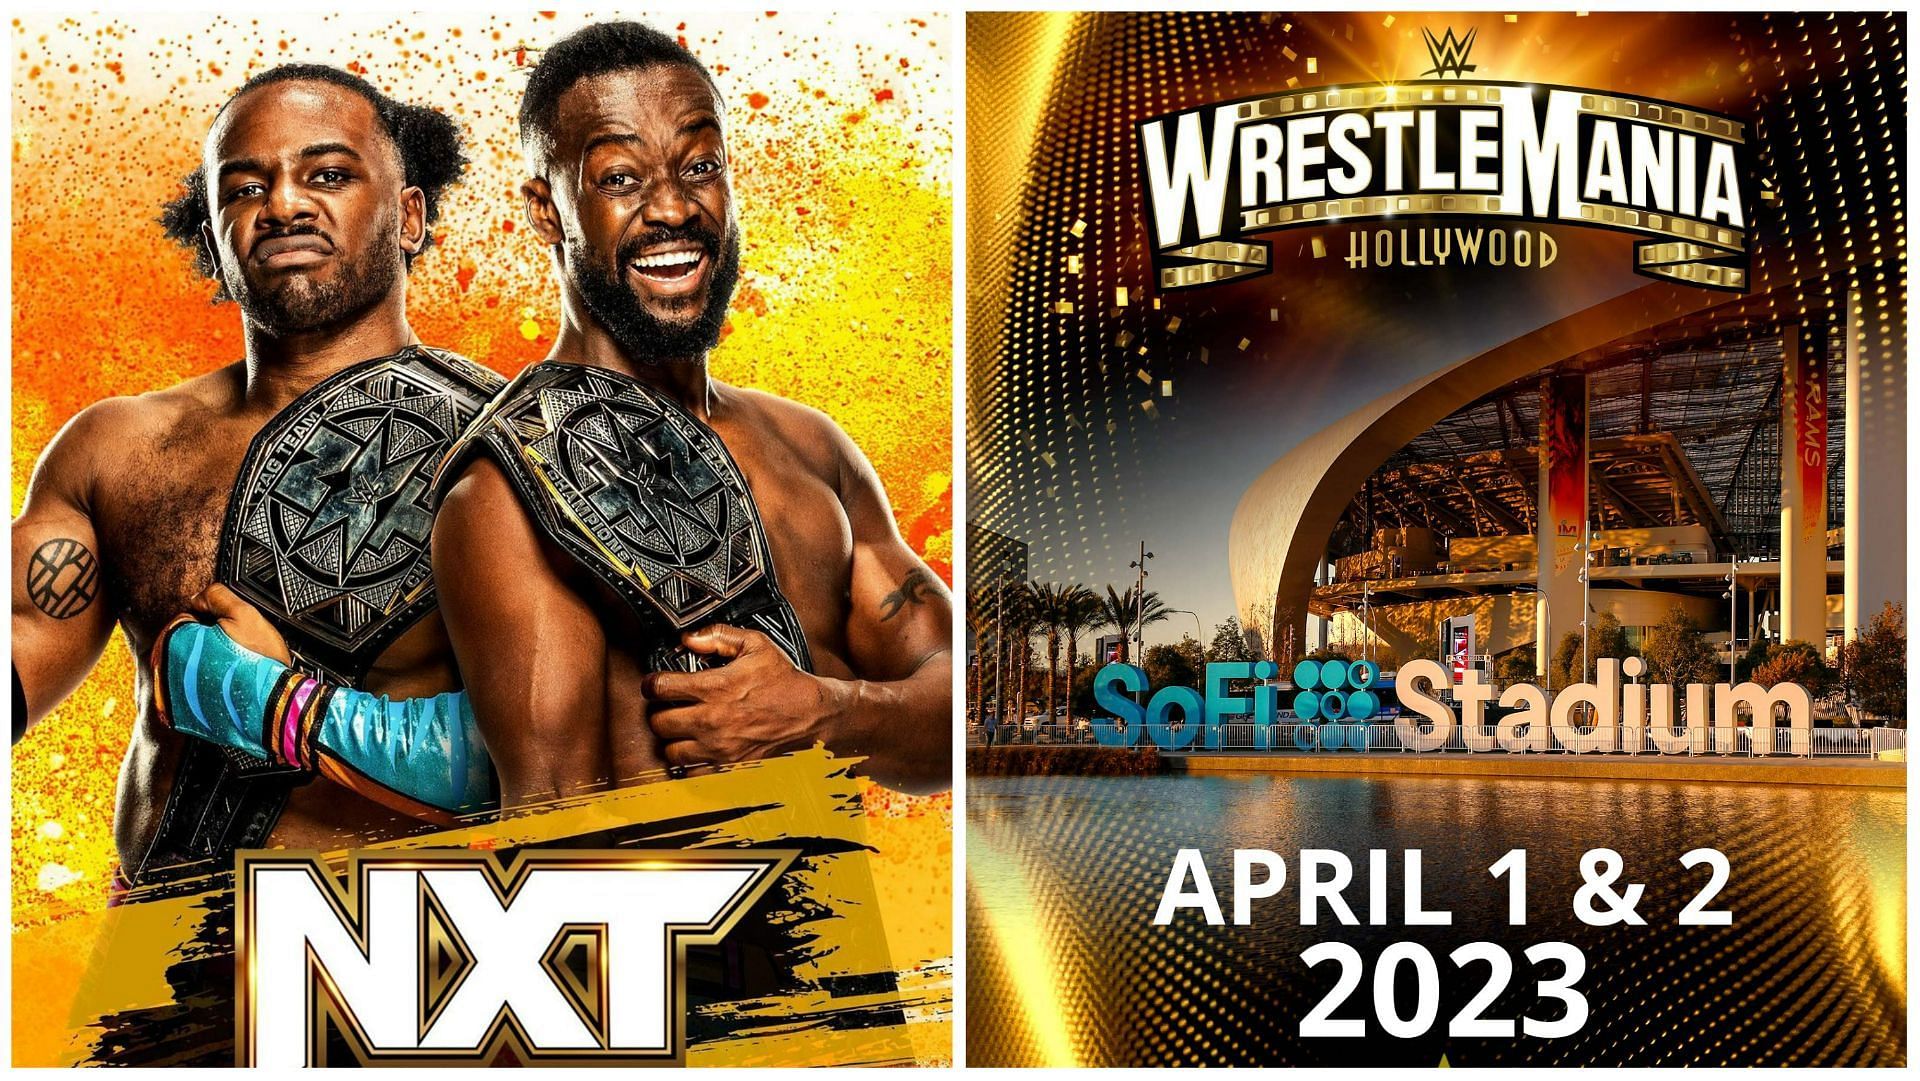 The New Day as NXT Tag Team Champions (left), An advertisement for WWE WrestleMania 39 (right)